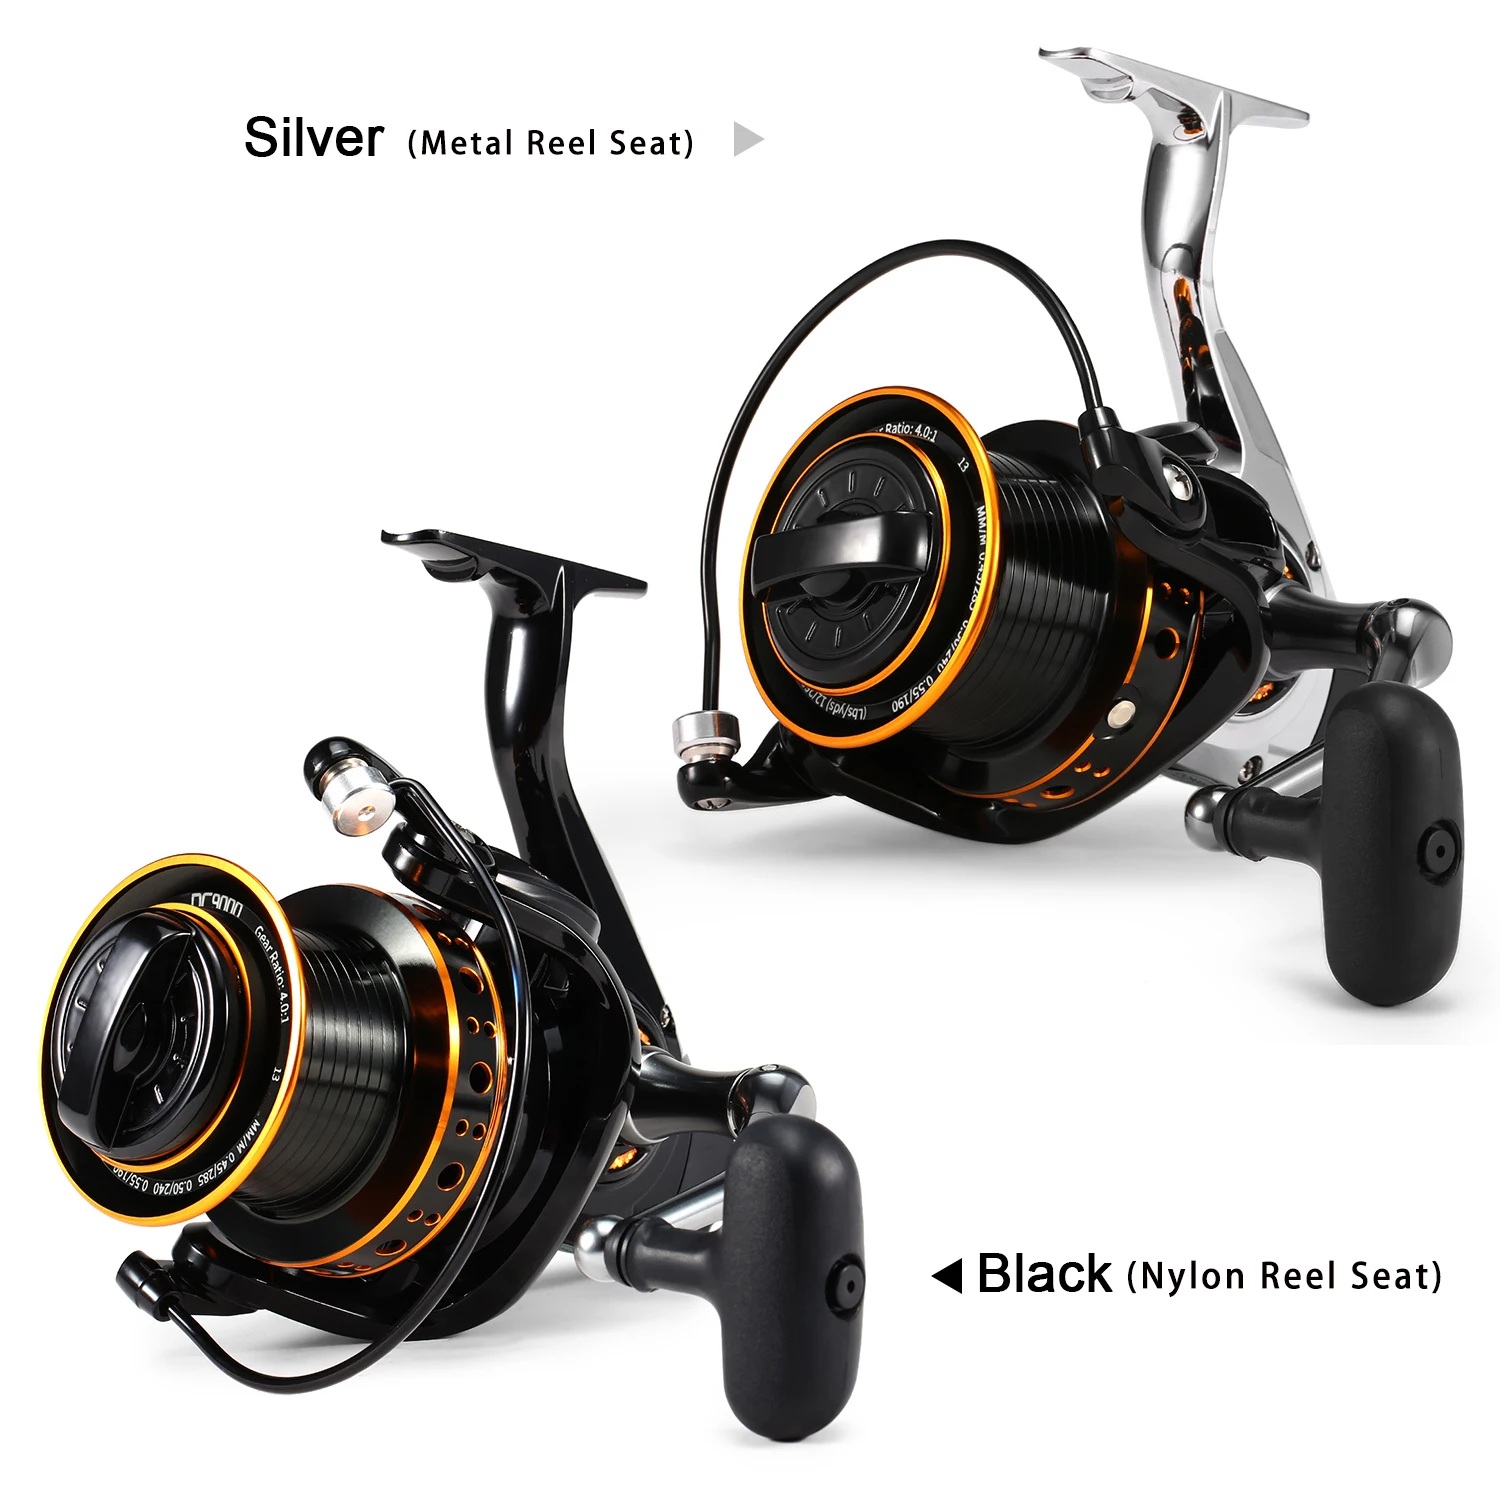 

2021 New Fishing coil Ratio Big Trolling Fishing Reels Professional Collapsible Metal Left/Right Hand Fishing Reel Wheels